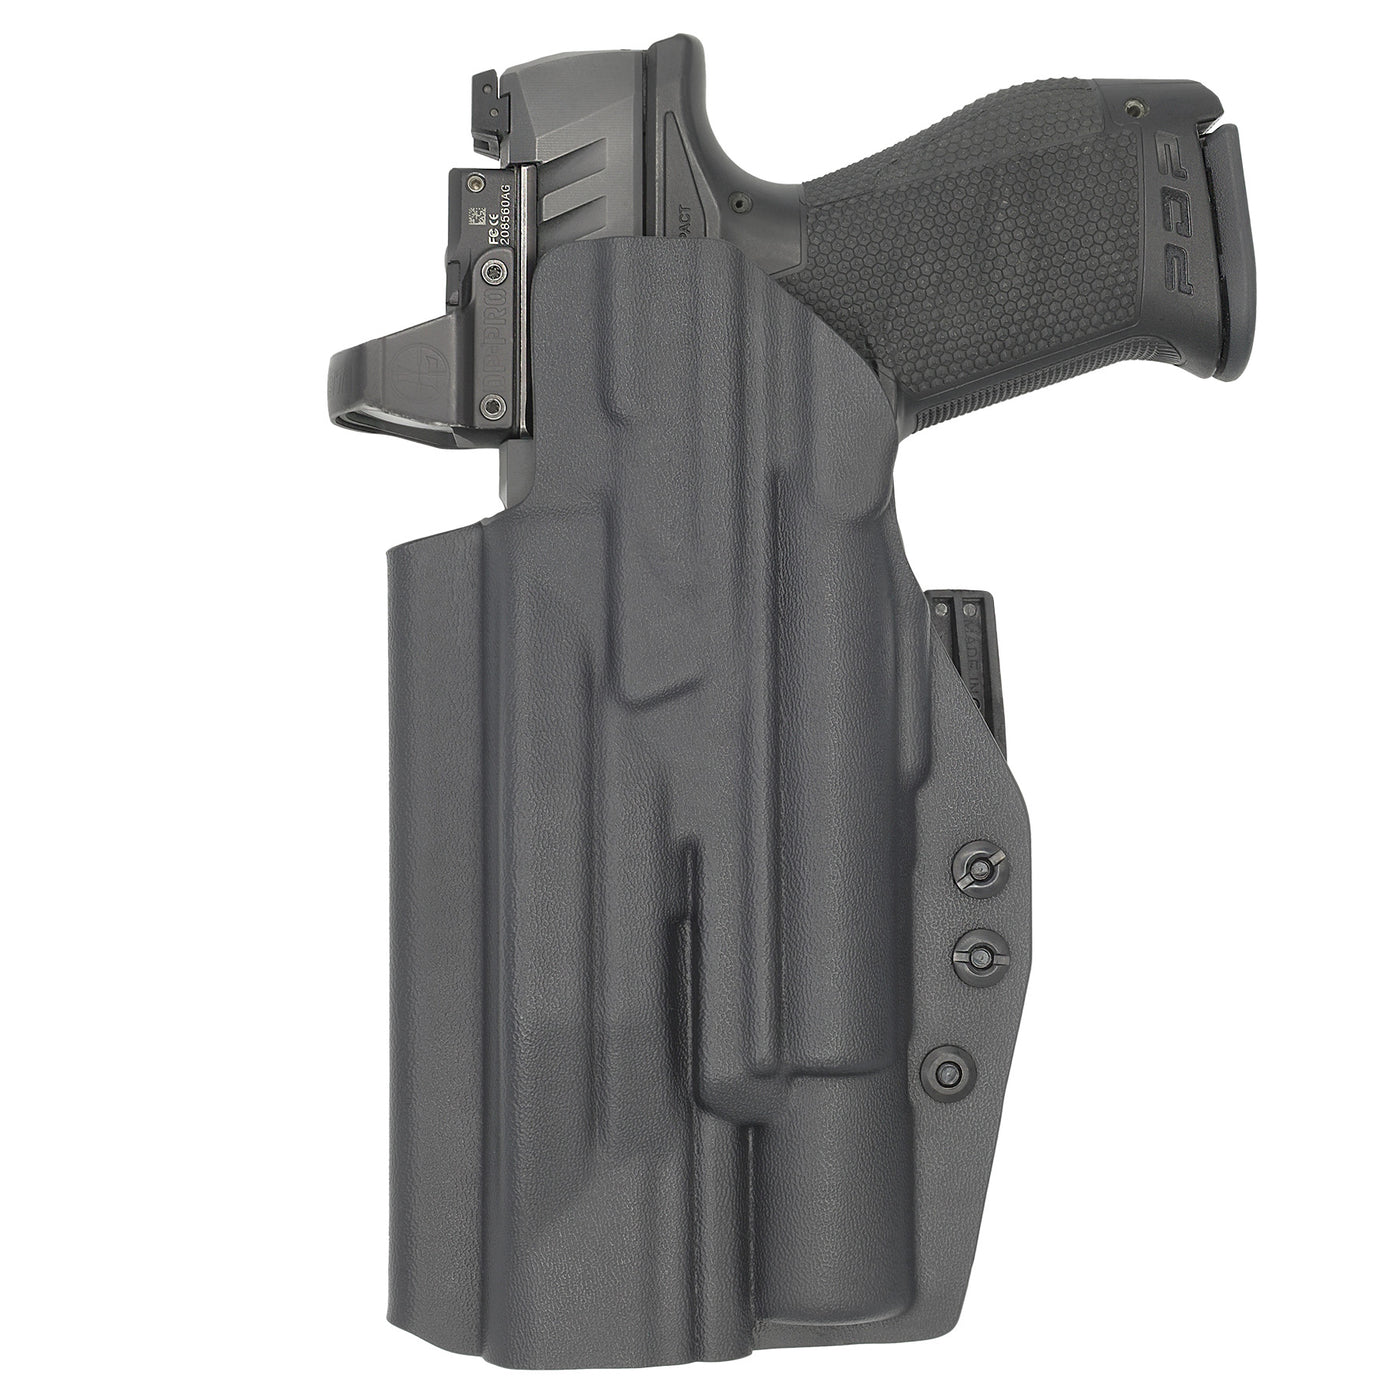 C&G Holsters Quickship IWB ALPHA UPGRADE Tactical S&W M&P Surefire X300 in holstered position back view